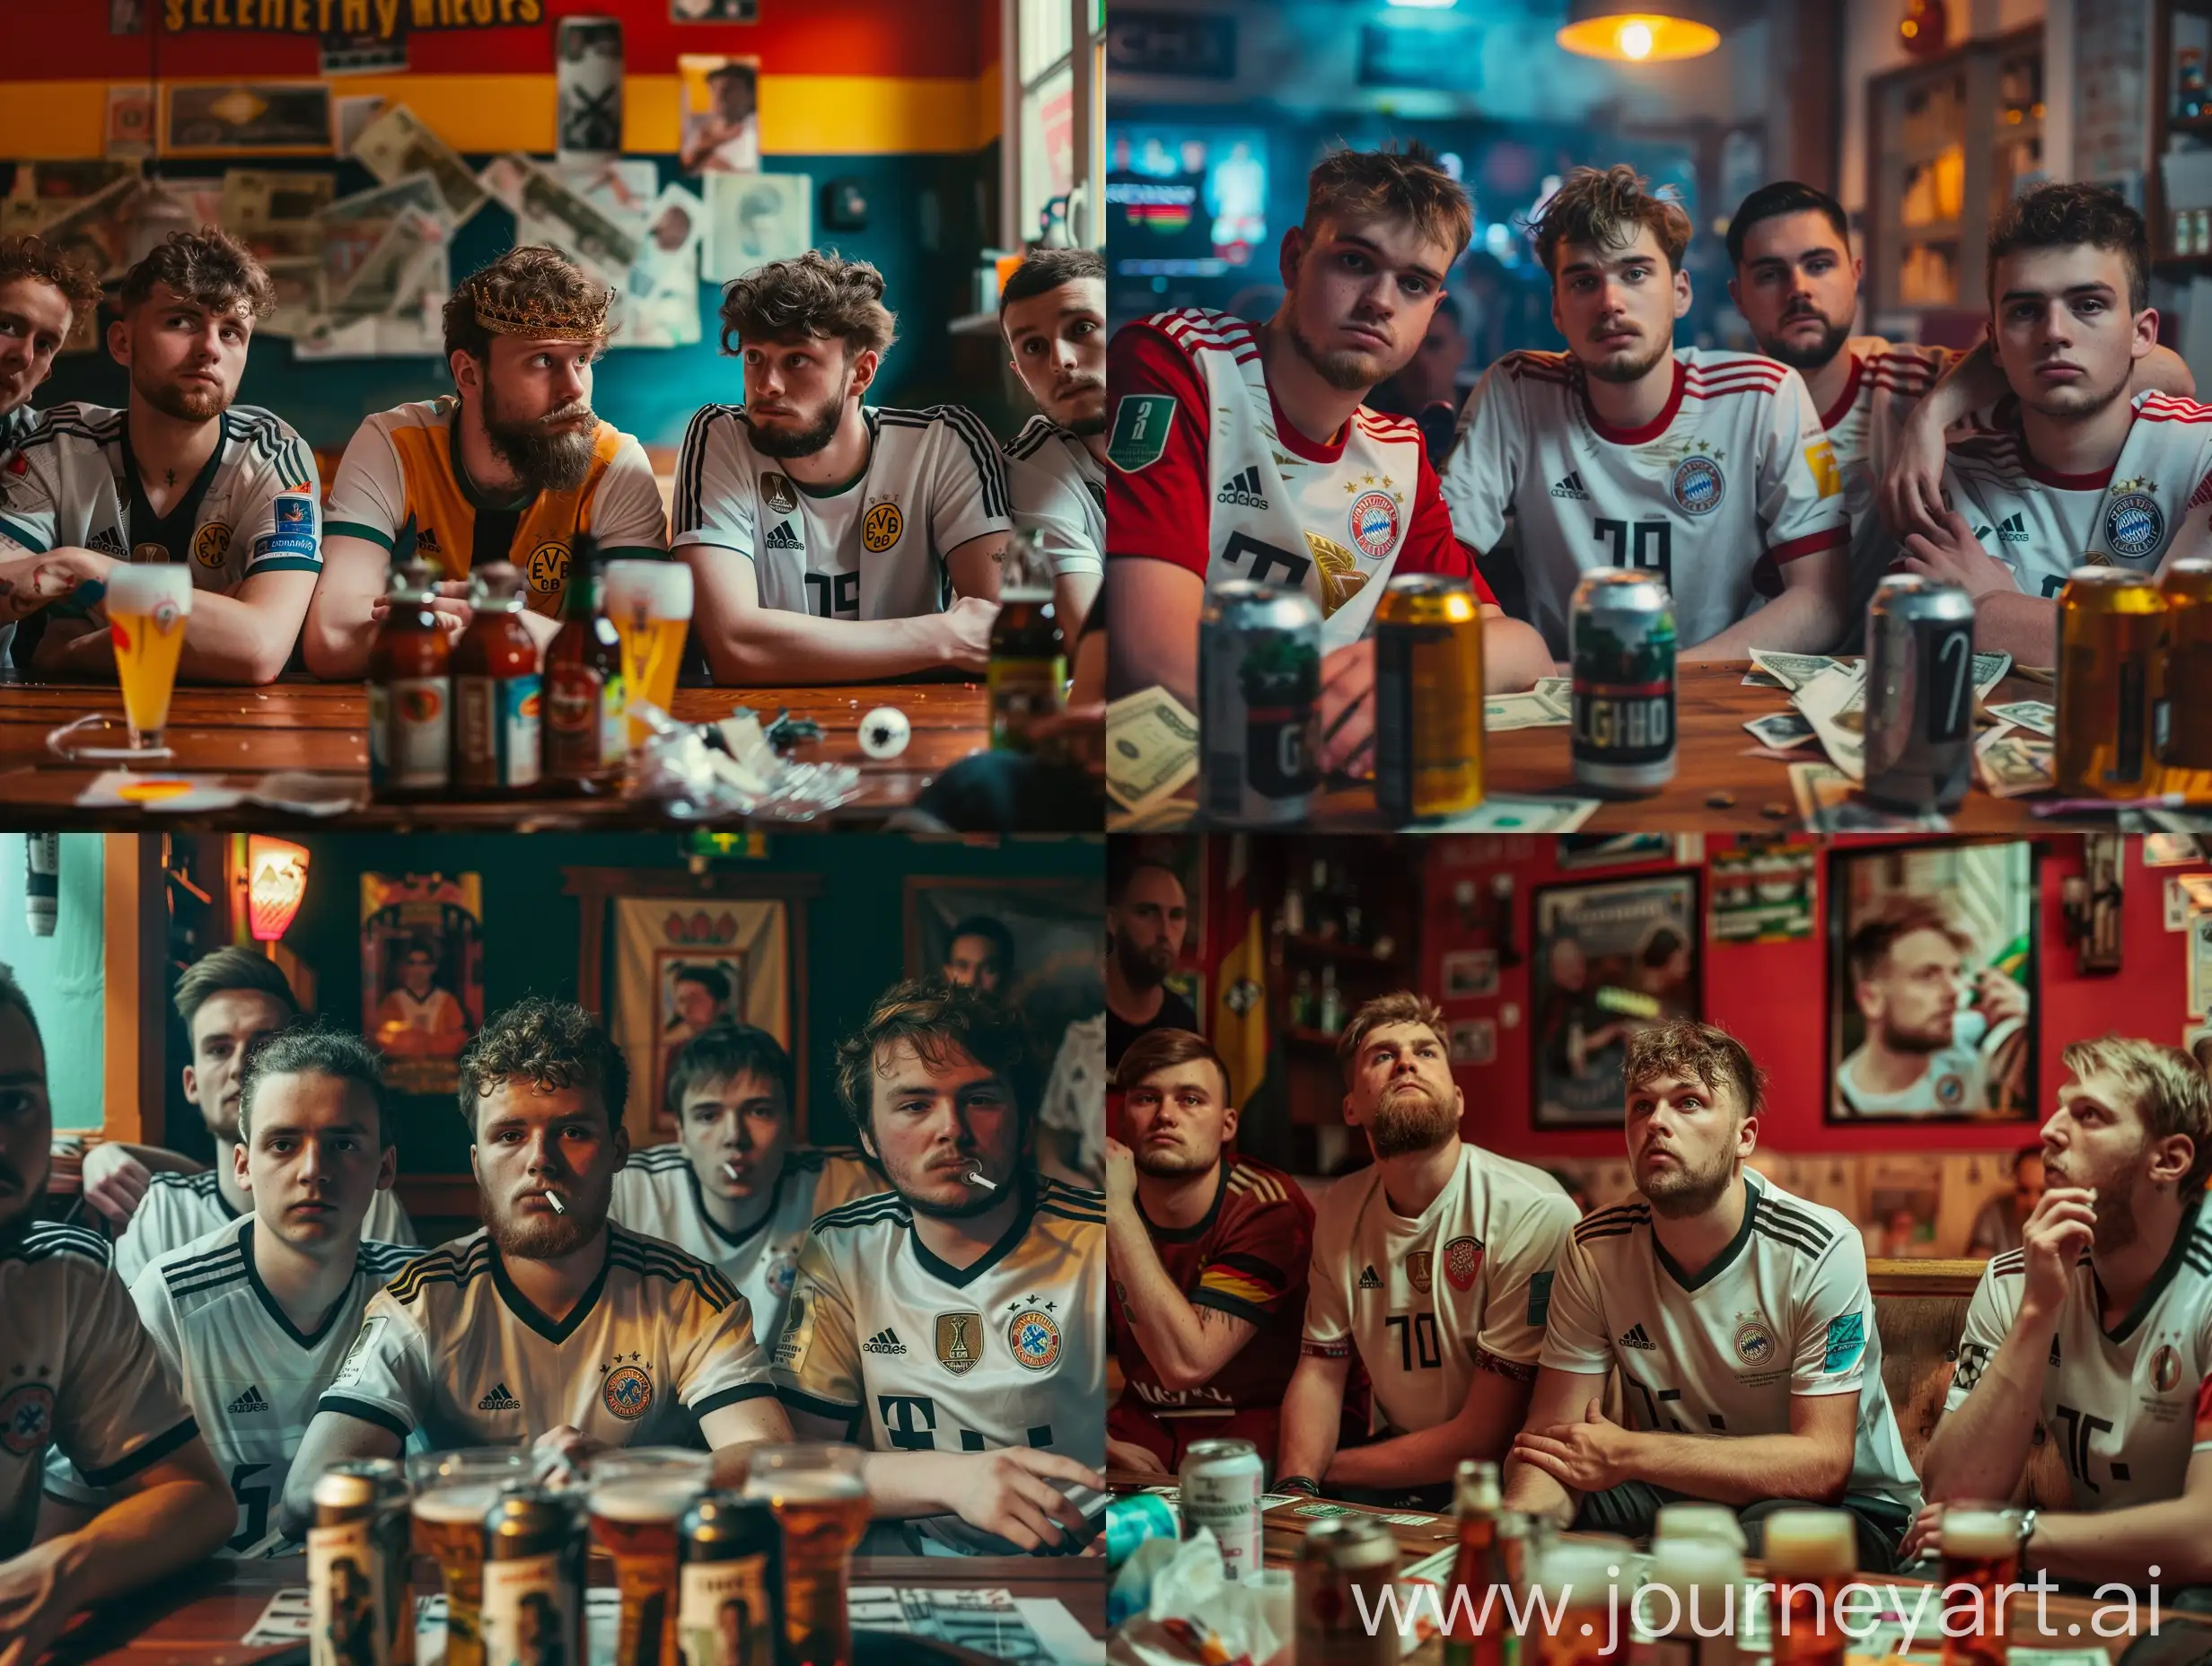 A high angle medium shot of 5 well-dressed young men aged 19-21 sitting in a pub, wearing Germany jerseys, watching a Euro Cup match. On the table in front of them are numerous banknotes. On the far left, Gelukas, with a brown beard and thinning hair, has a snus under his upper lip, and in front of him are his car keys and a snus can. Next to him is Geleon, who is slightly overweight, also with a snus under his upper lip and smoking a vape, with his Mercedes keys in front of him. In the golden middle sits the centerpiece, Âghâ, with a crown on his head, sitting on a throne, with a black beard, six beers in front of him, and smoking a joint. Next to him is his friend Seige, a lightskin boxer, with six beers in front of him, also smoking a joint. Beside Seige sits Konsti, with six beers in front of him and a snus under his upper lip, resembling a chameleon. The pub is lively with dim lighting, and the atmosphere is festive. Shot with a Canon EOS-1D X Mark III, 50mm f/1.4 lens, vibrant colors